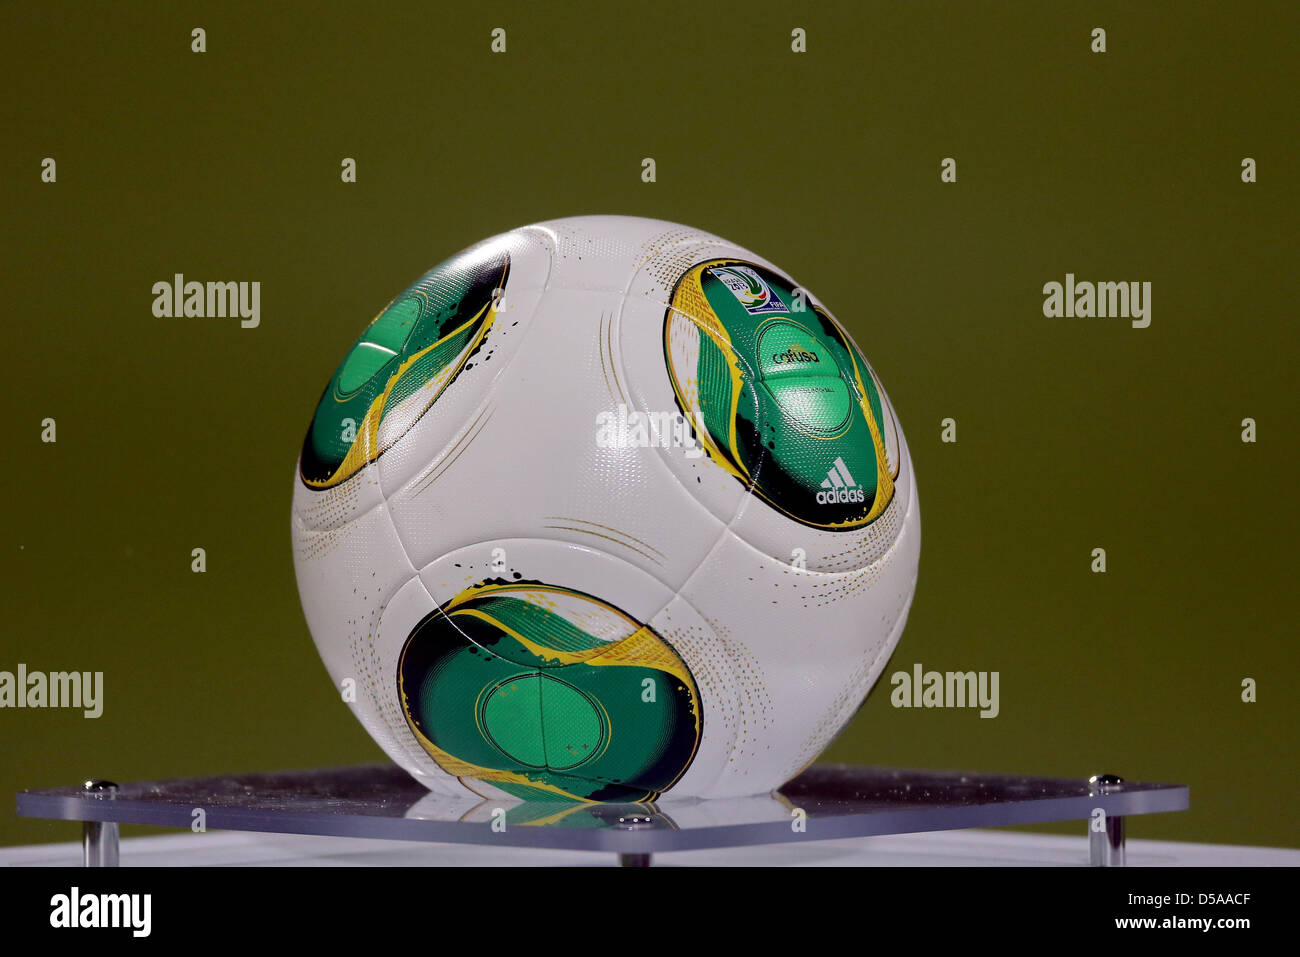 The match ball, named Cafusa, designed for the football world